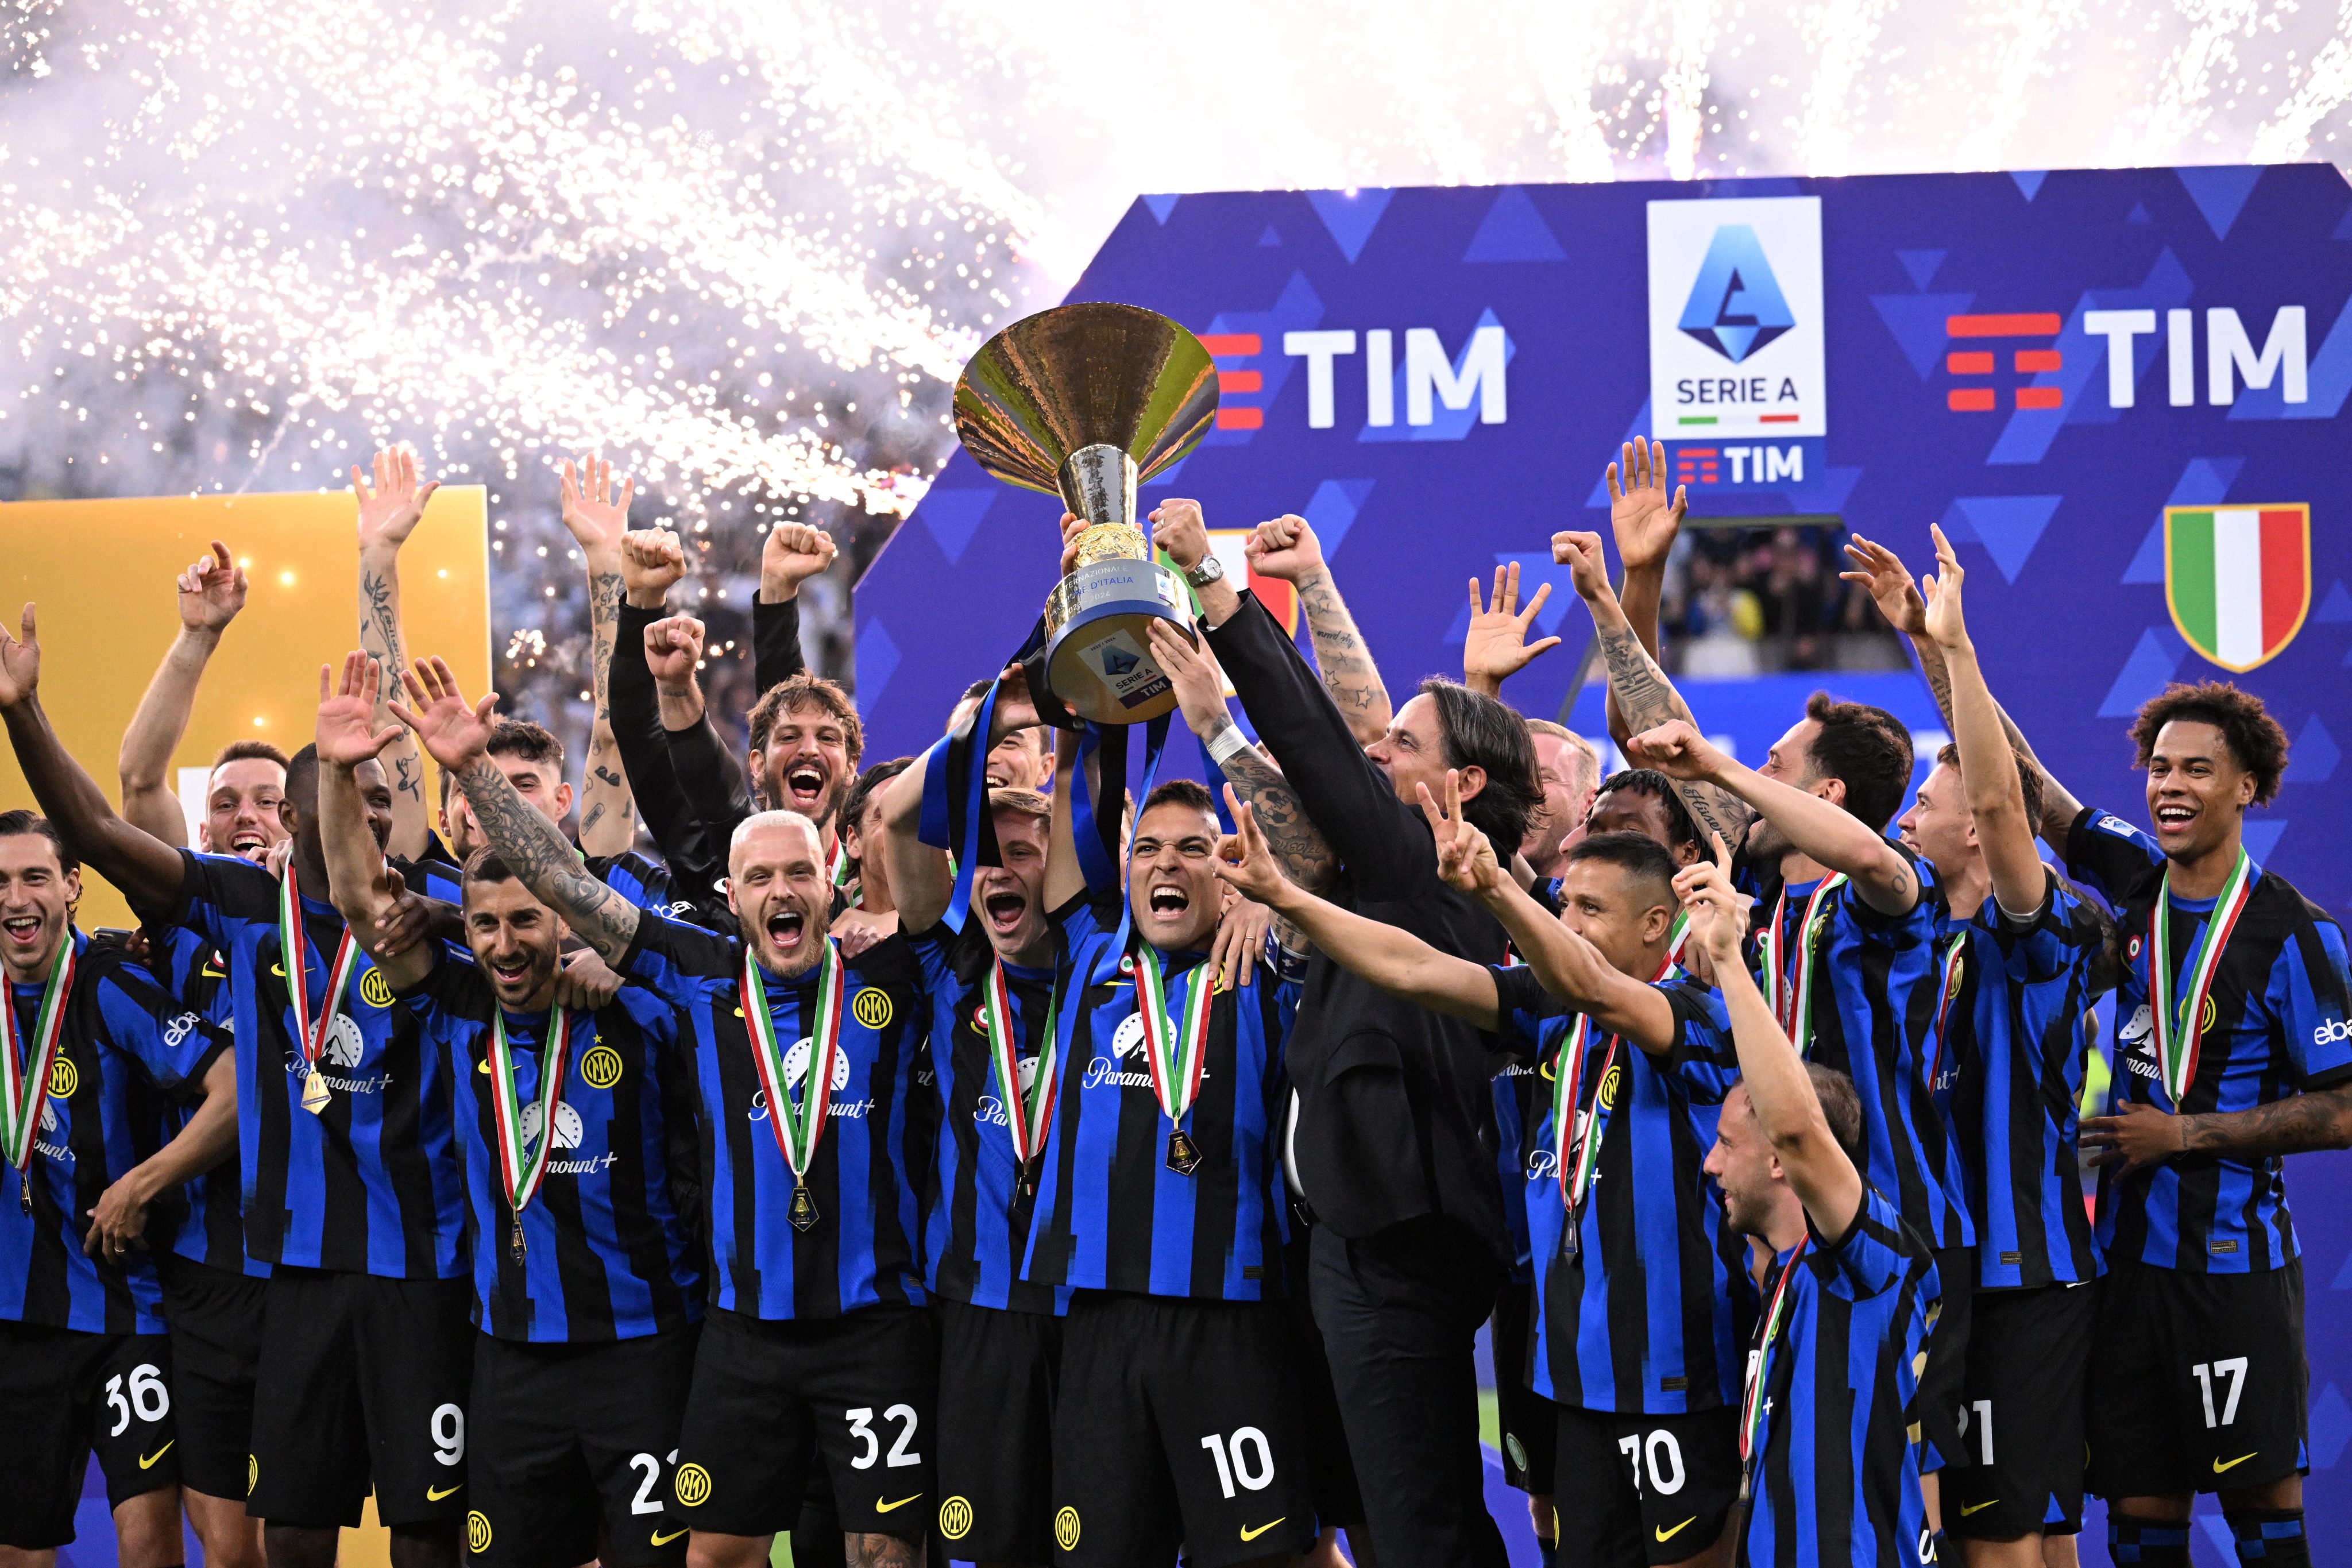 Inter Milan players and staff celebrate after winning this season’s Serie A title. Photo: Xinhua